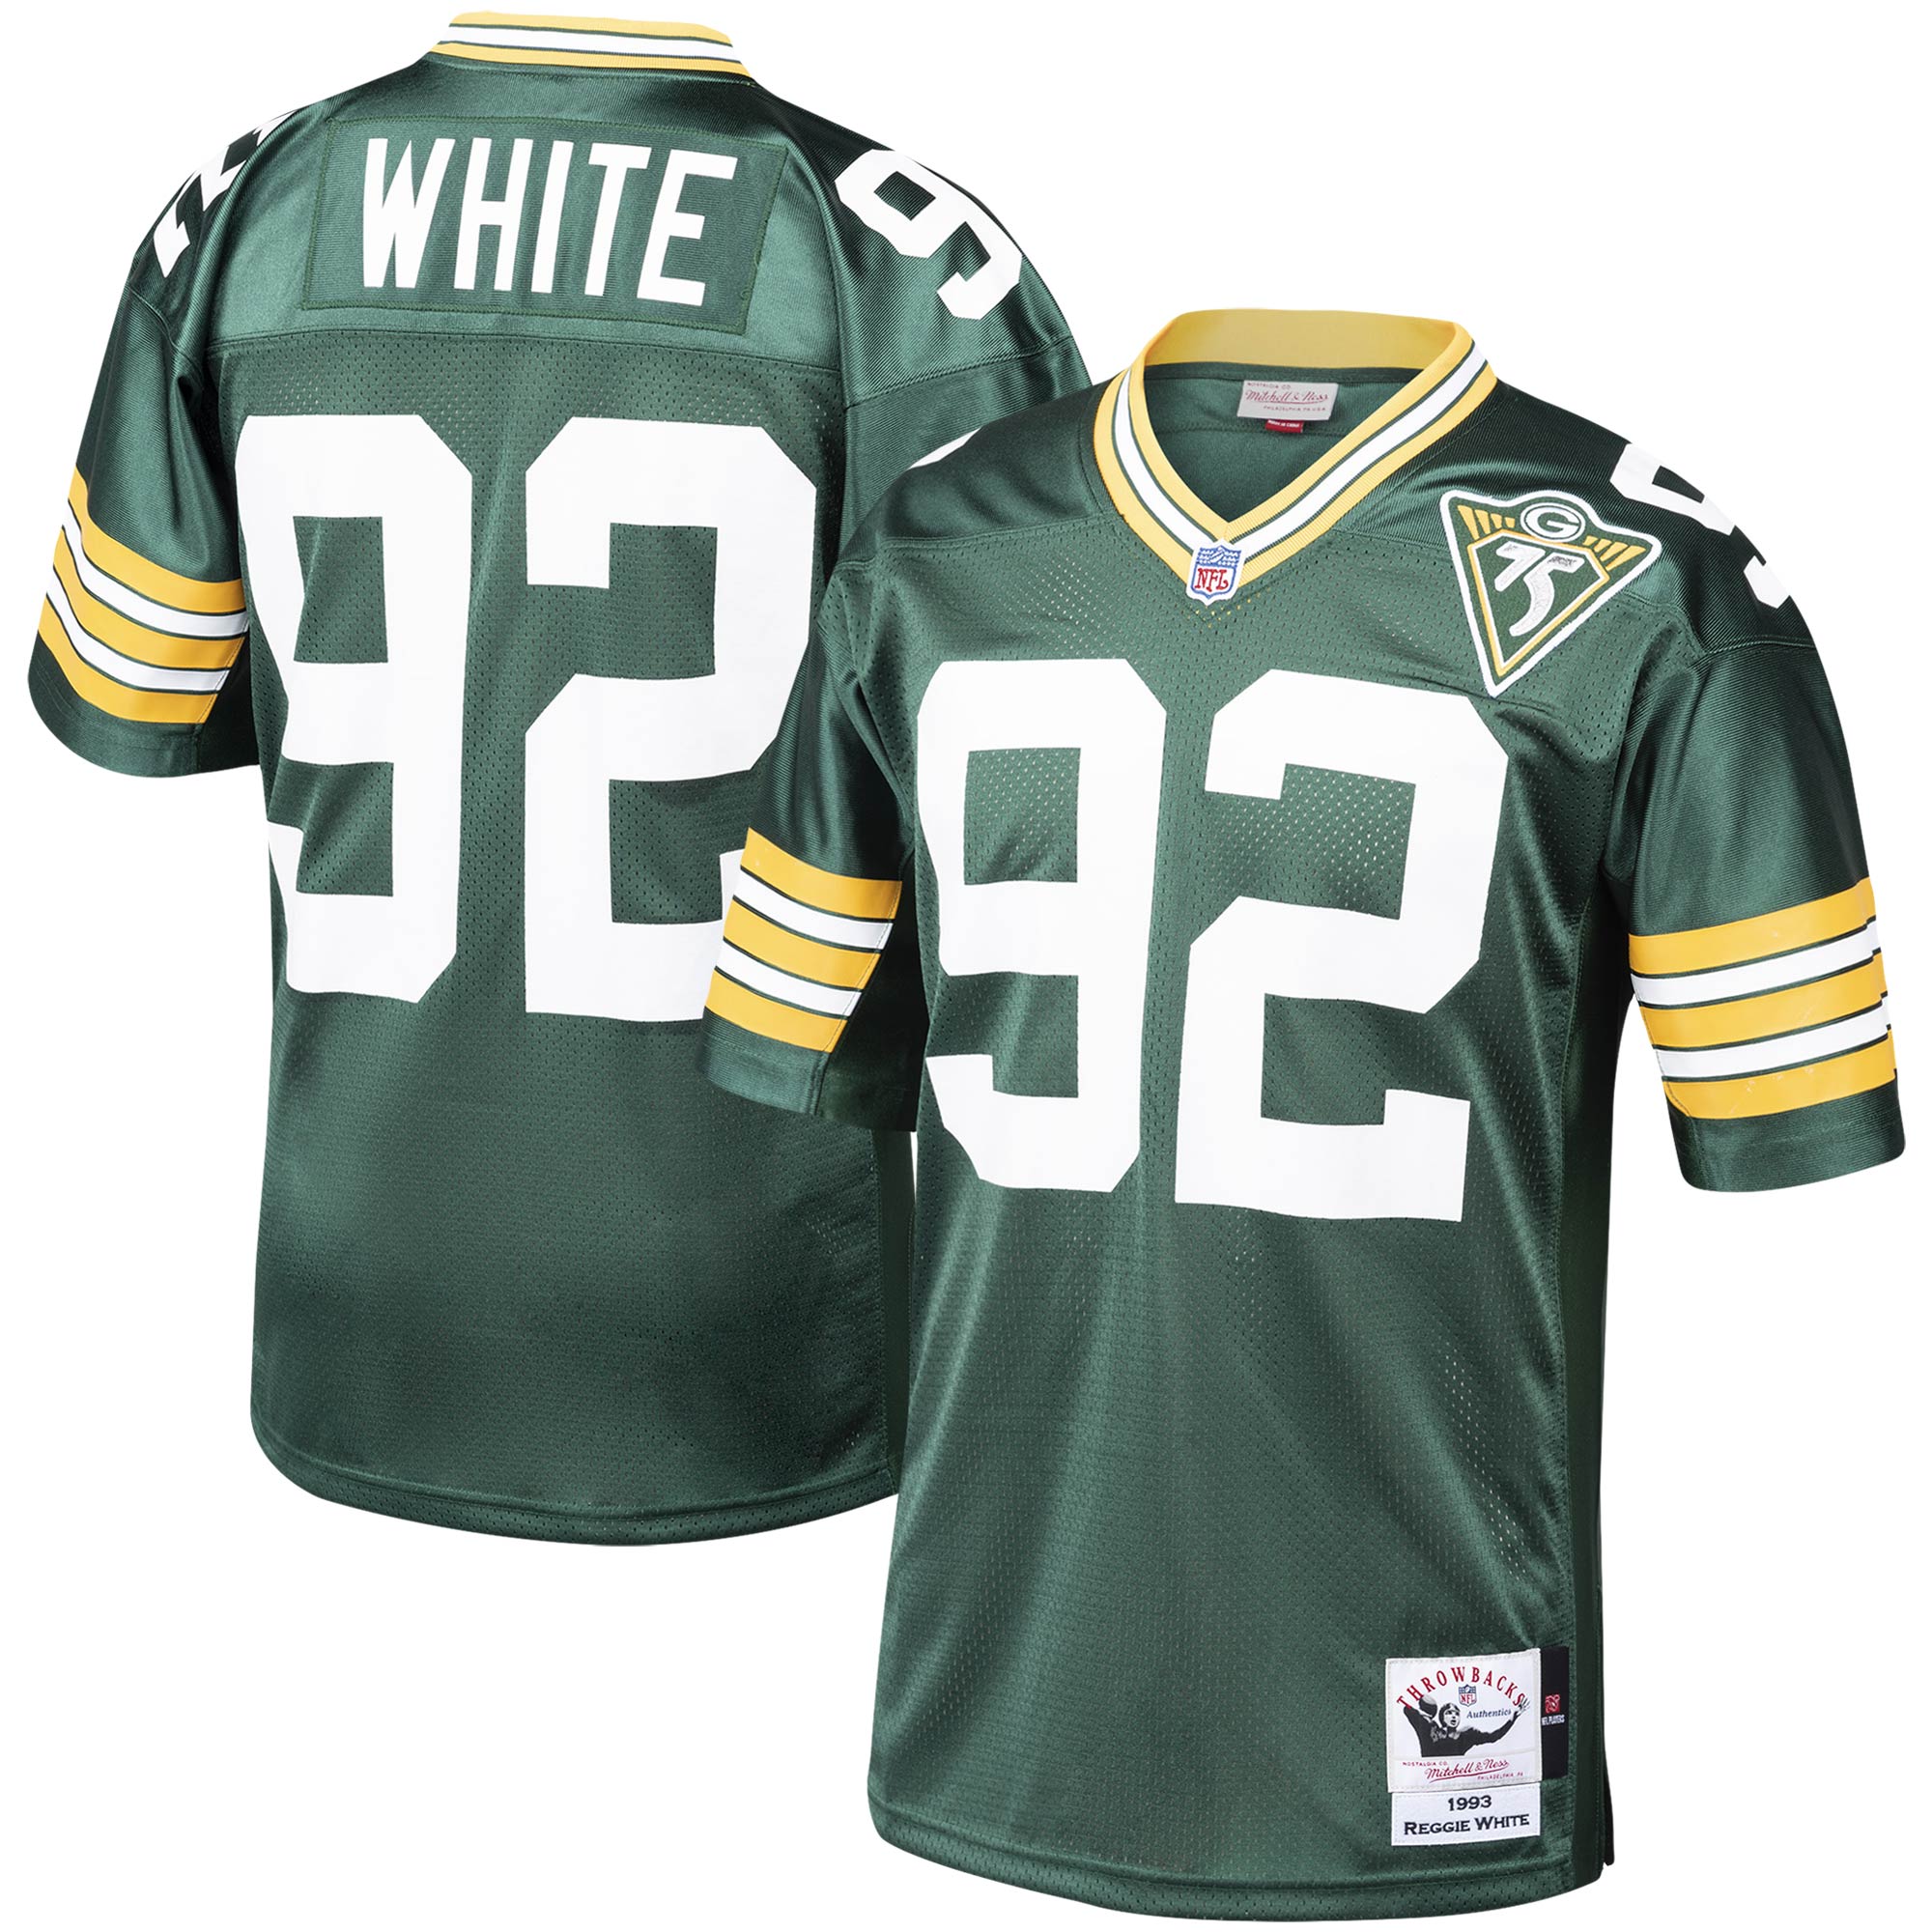 Men's Green Bay Packers Jerseys Green Reggie White 1993 Authentic Throwback Retired Player Style